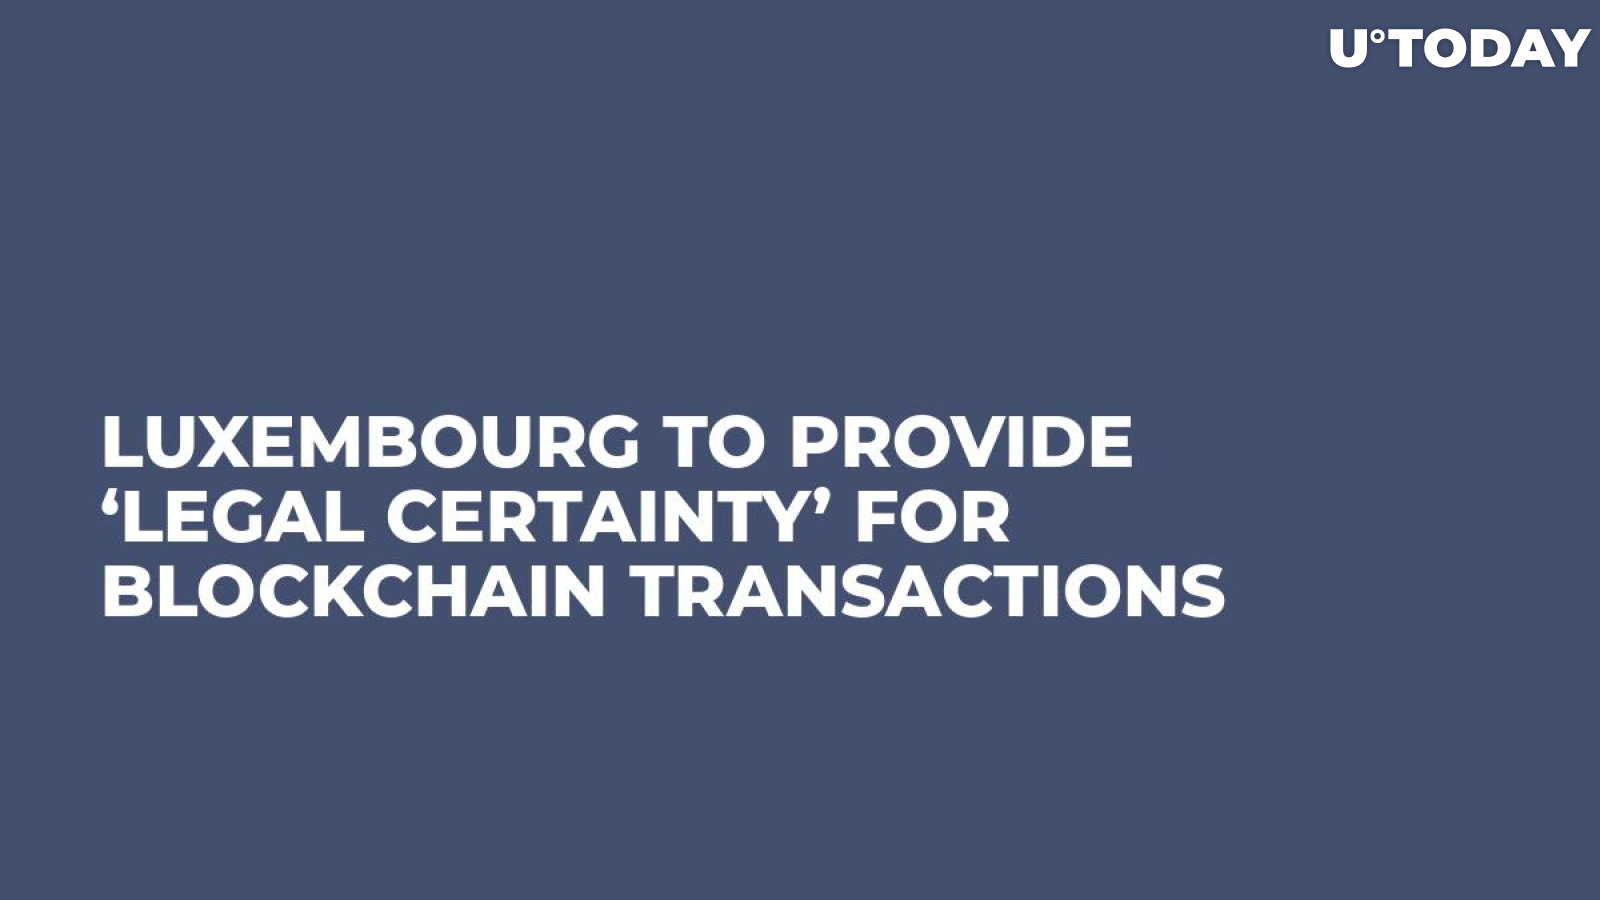 Luxembourg to Provide ‘Legal Certainty’ For Blockchain Transactions